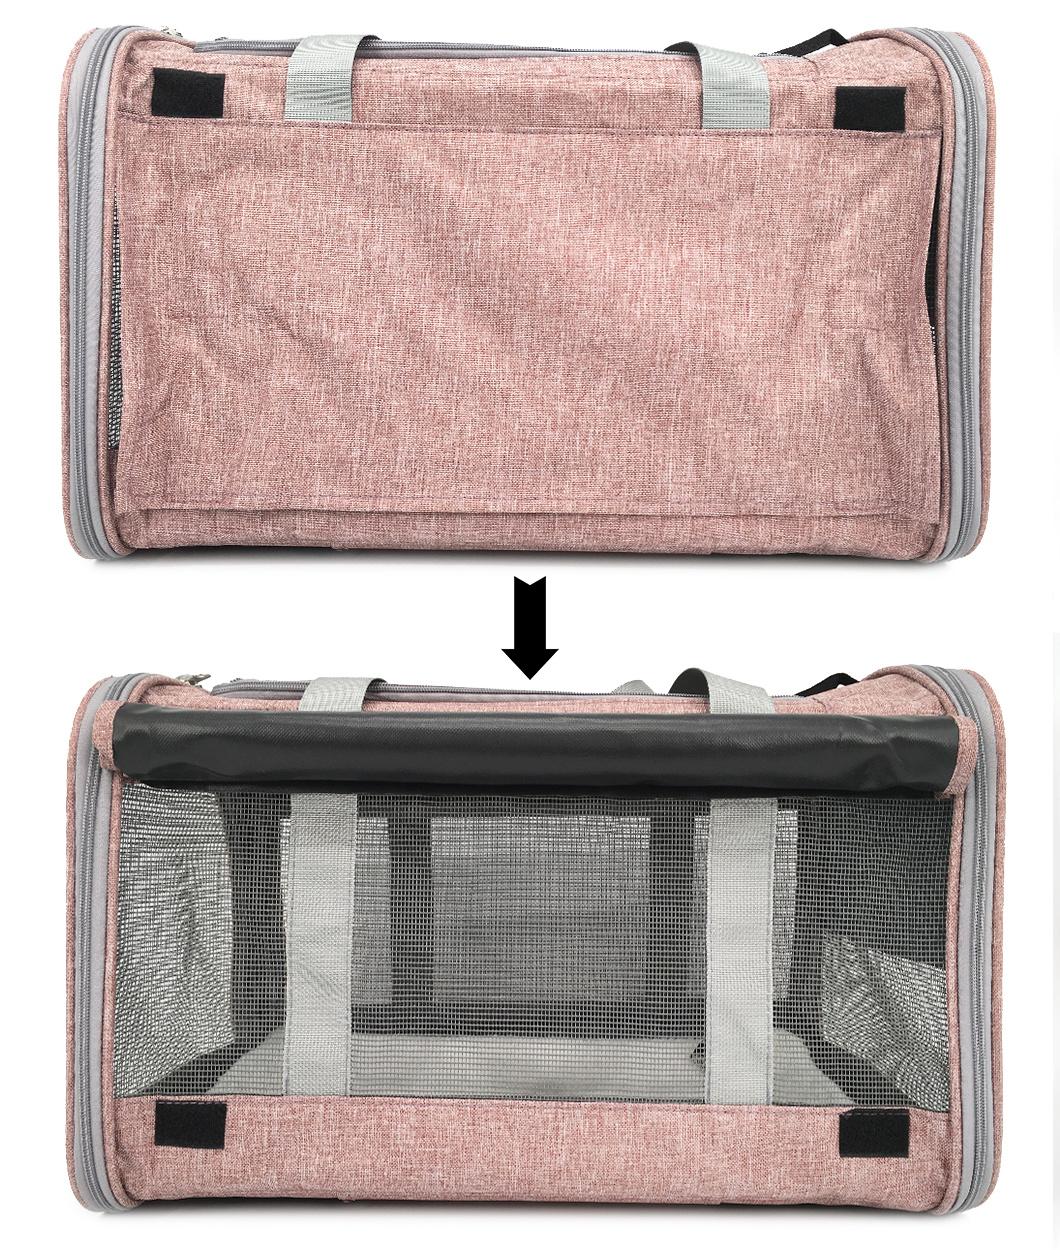 Small Pet Carrier Kitten Carrier/ Dog Breed Carrier/Soft Fleece Pads/Washable/Pet Pursetravel Tote/Kennel/Foldable/Portable Crate/Shoulder Strap